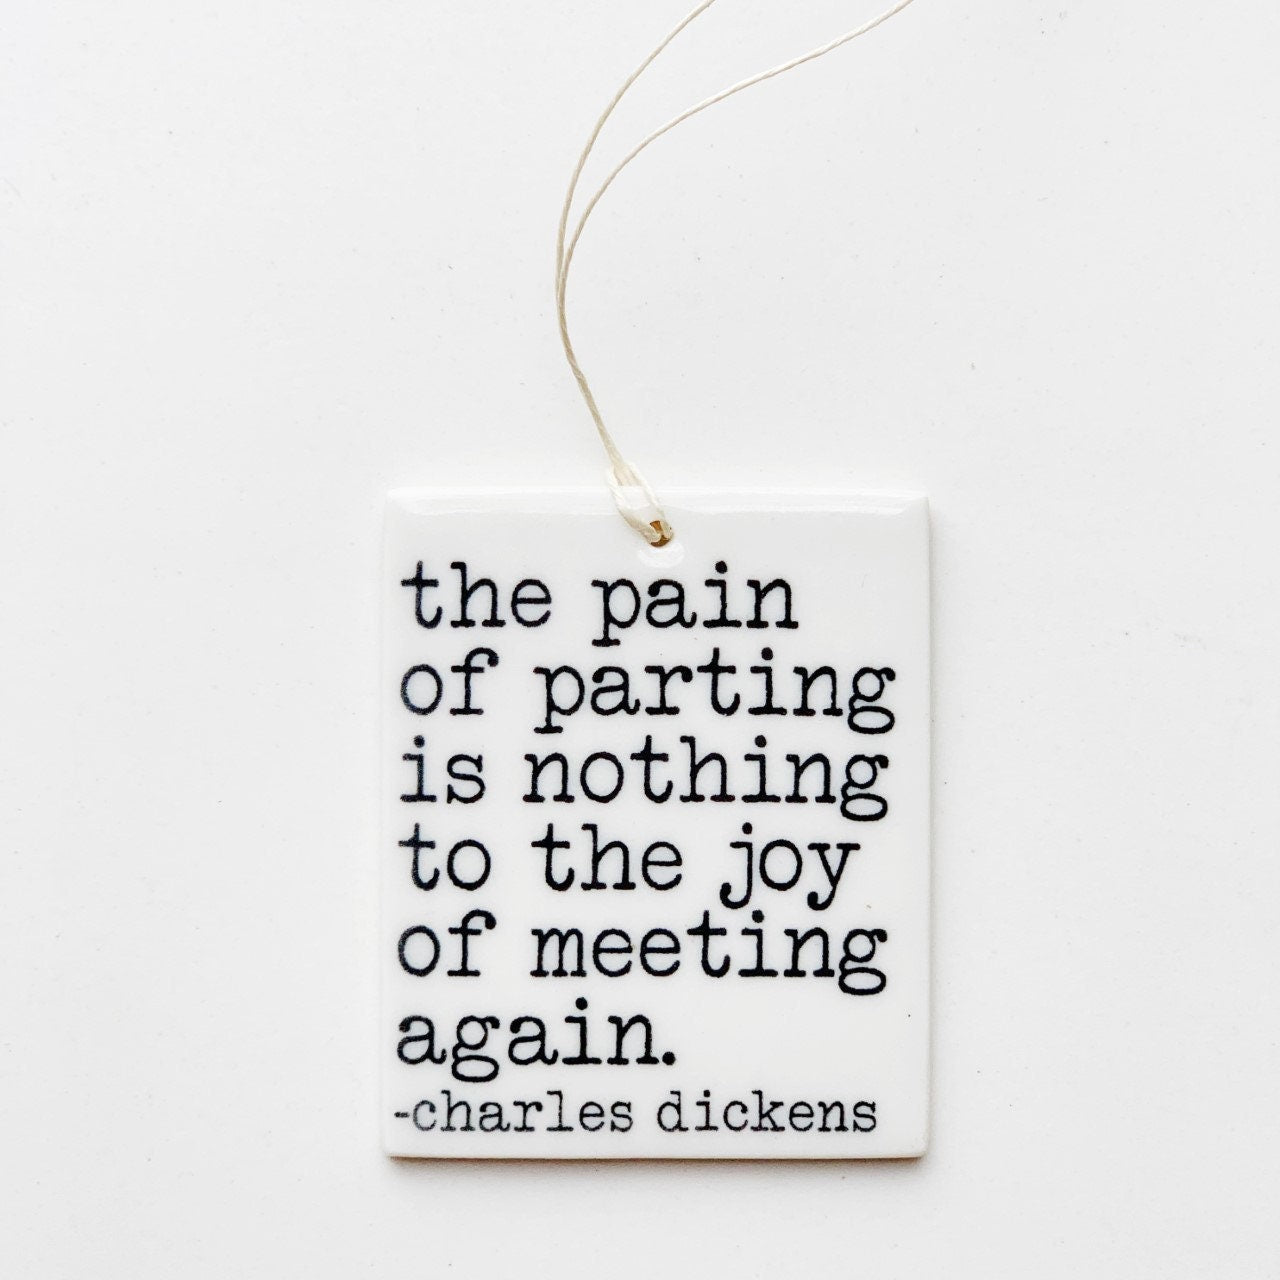 charles dickens quote ceramic wall tag